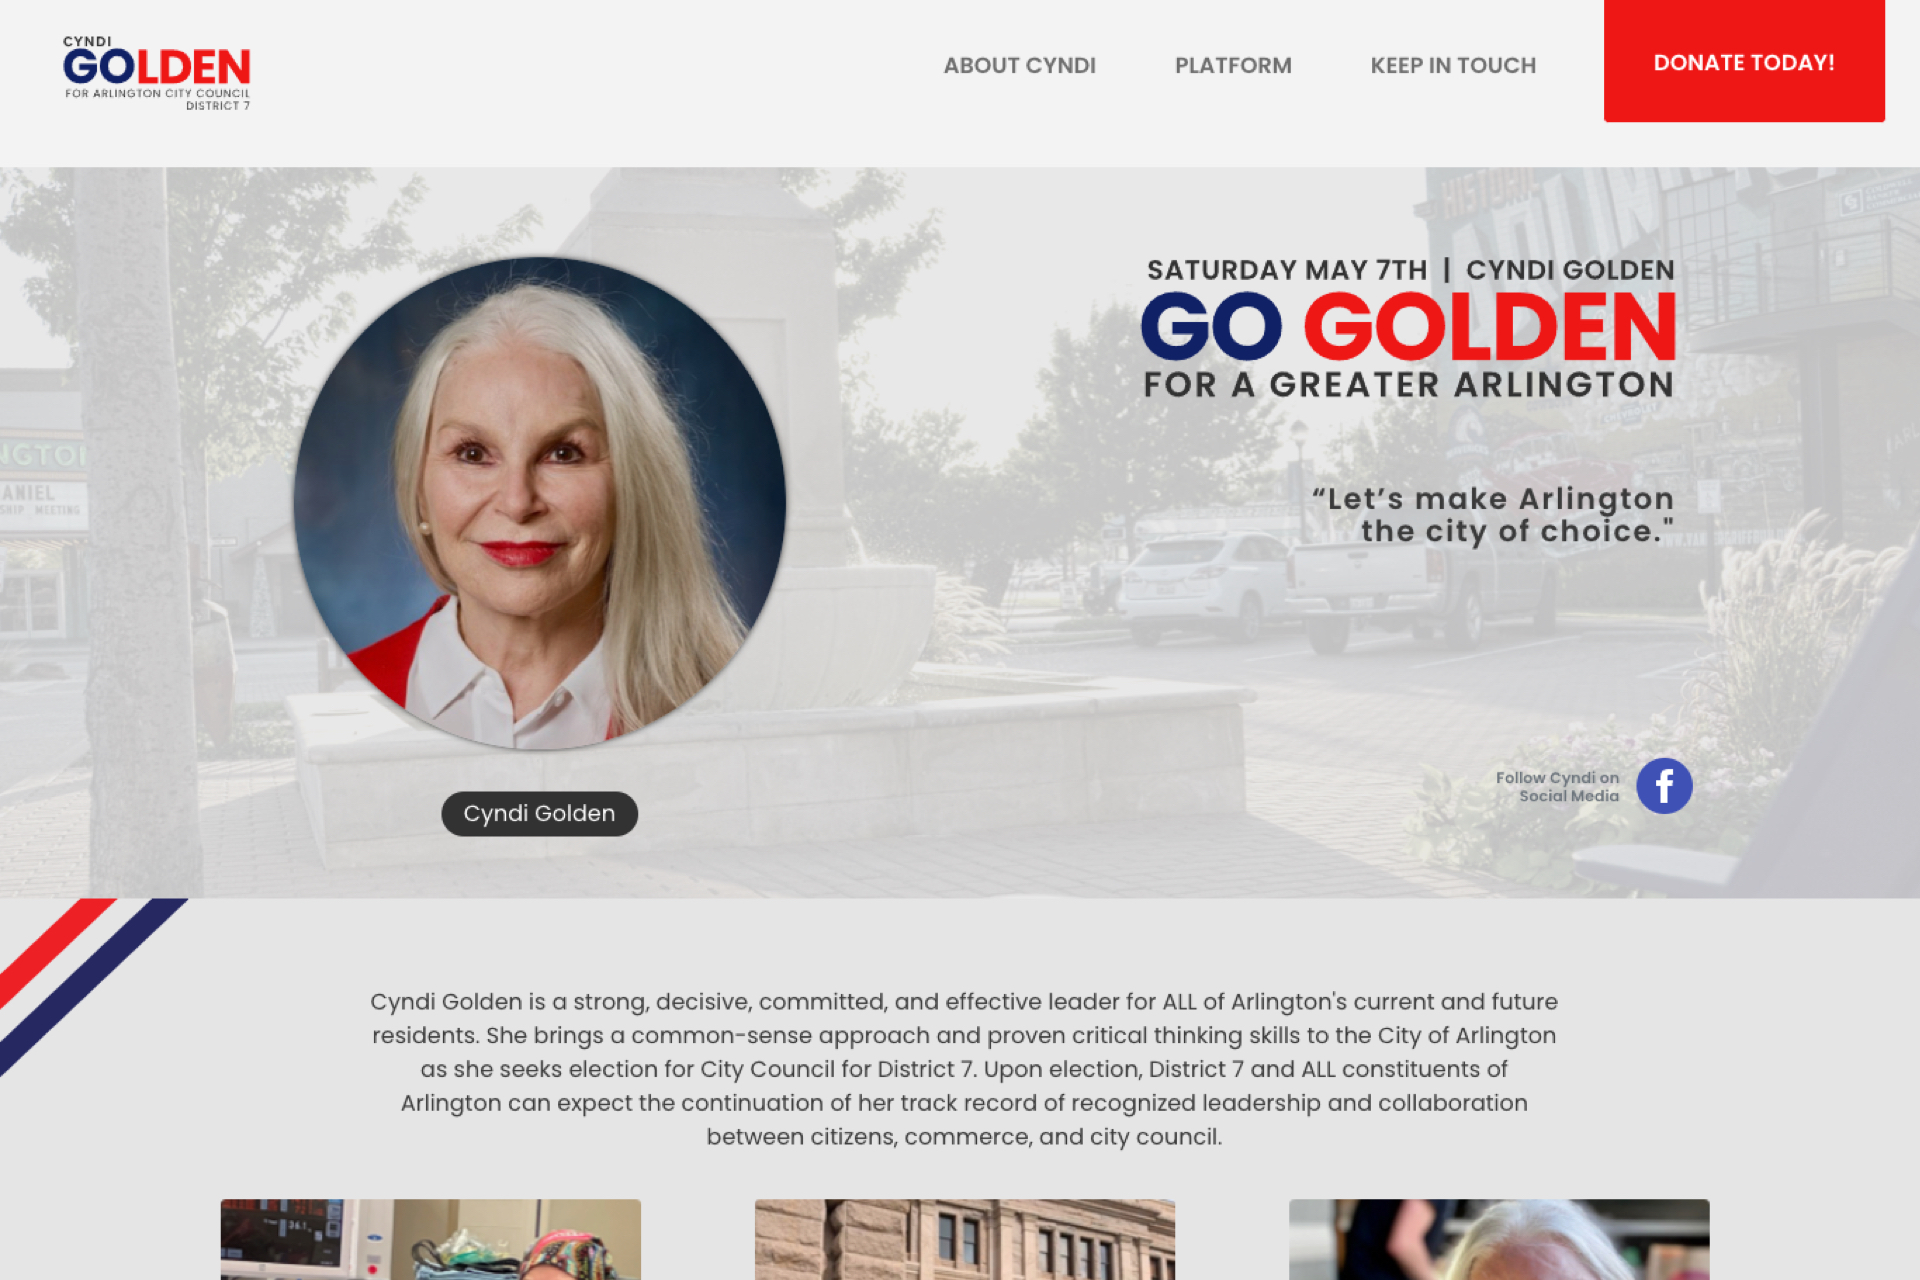 Campaign for Cyndi Golden